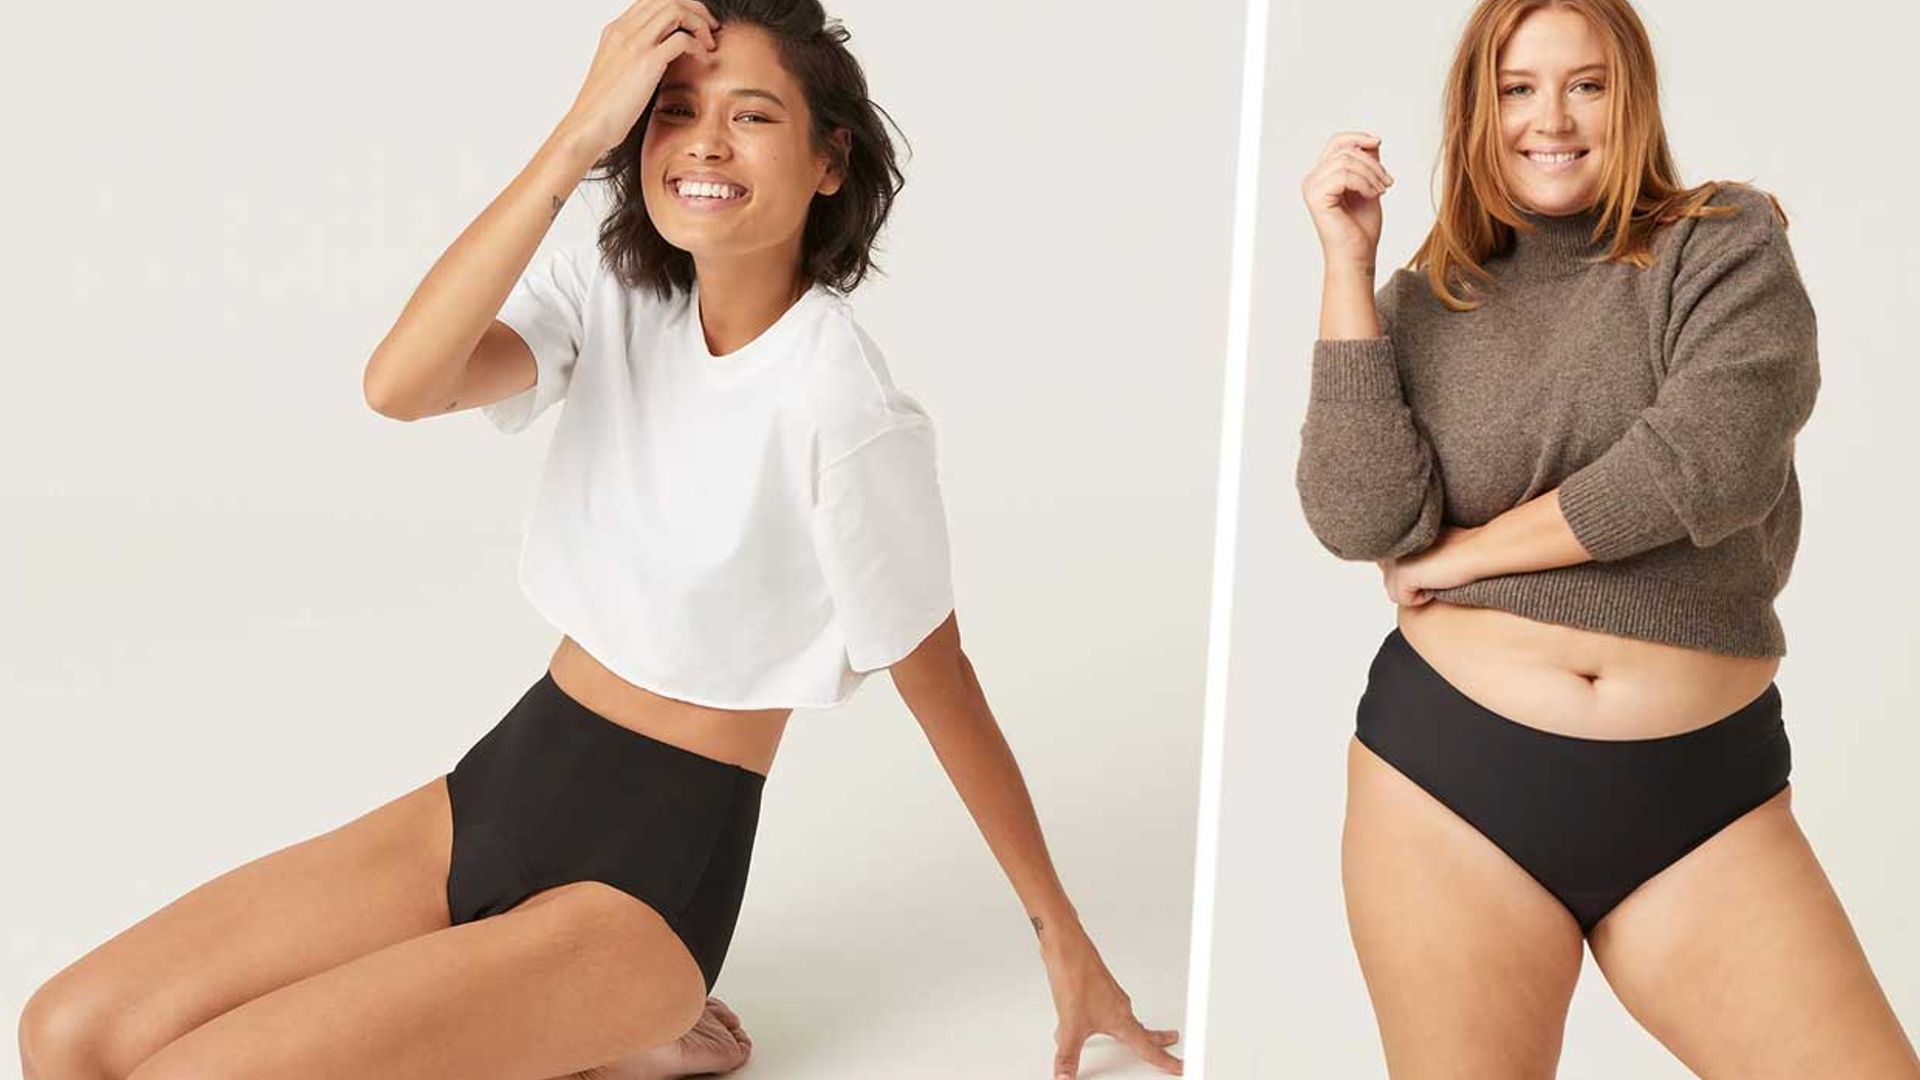 MODIBODI PERIOD UNDIES. I TRIED THEM. AND HERE'S WHAT HAPPENED